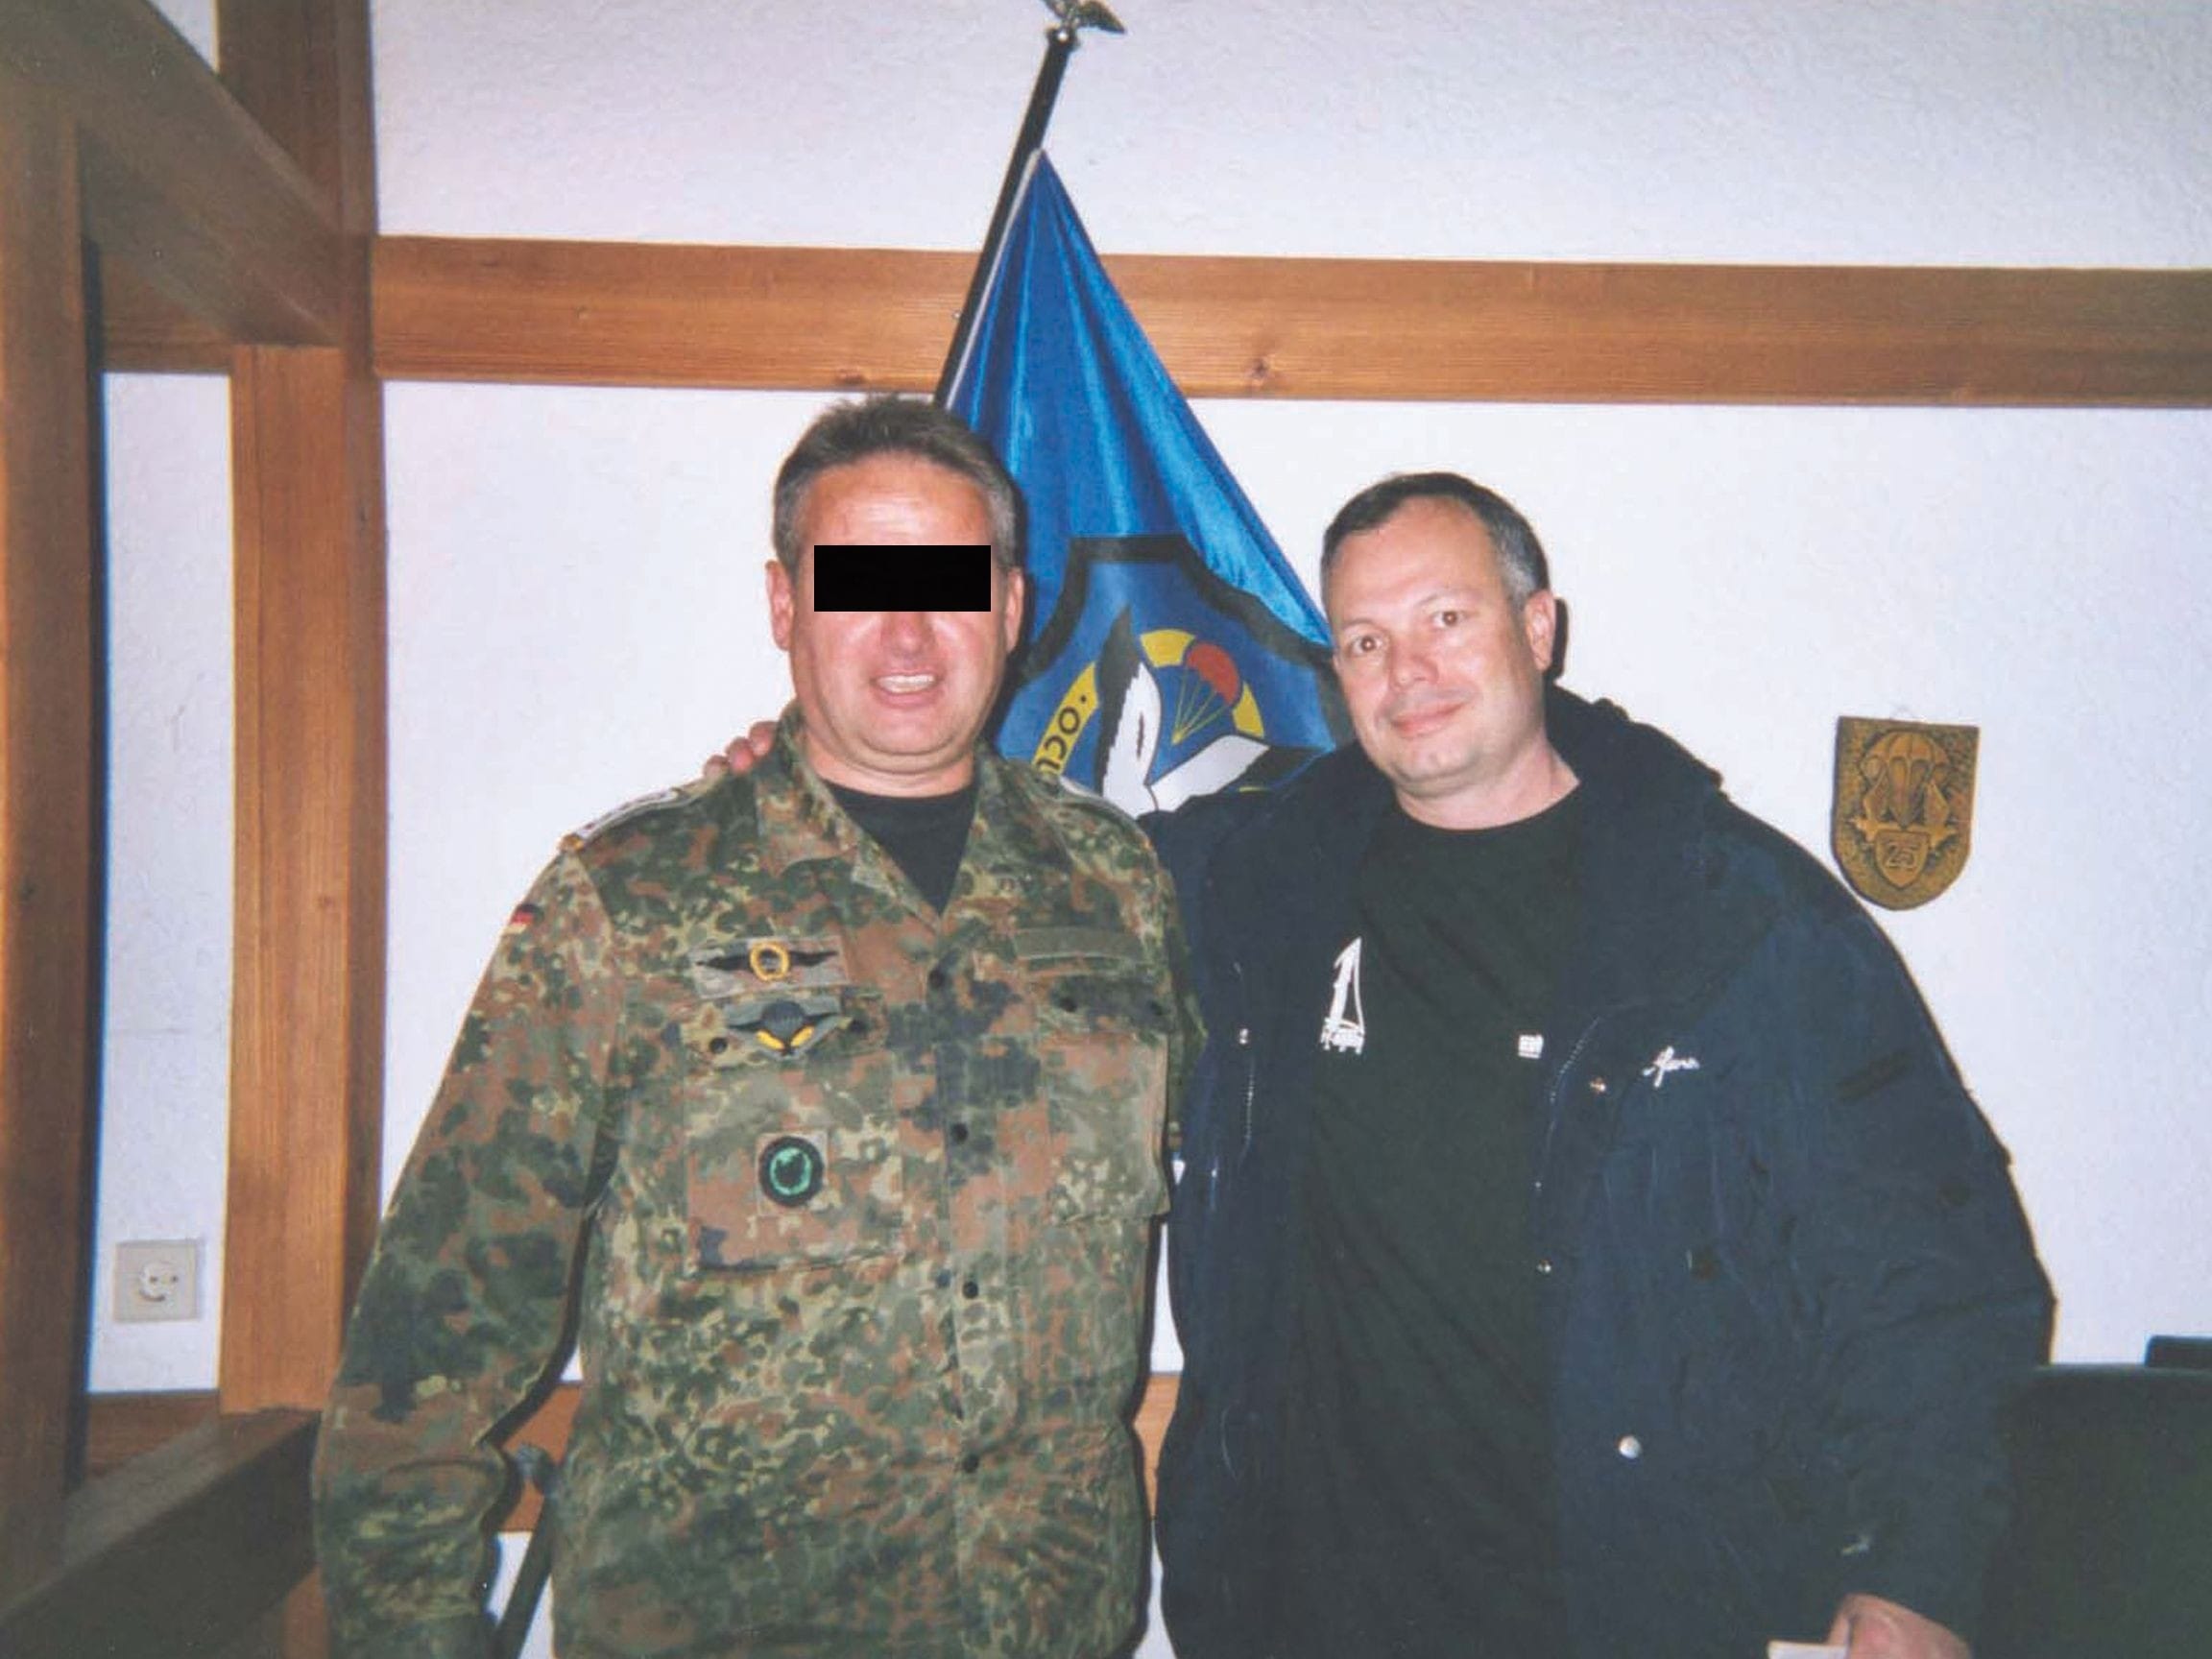 Jim with his German S.E.R.E. (Survival Evasion Resistance Escape) instructor at the Staufer Kaserne military base before going out into the forest.